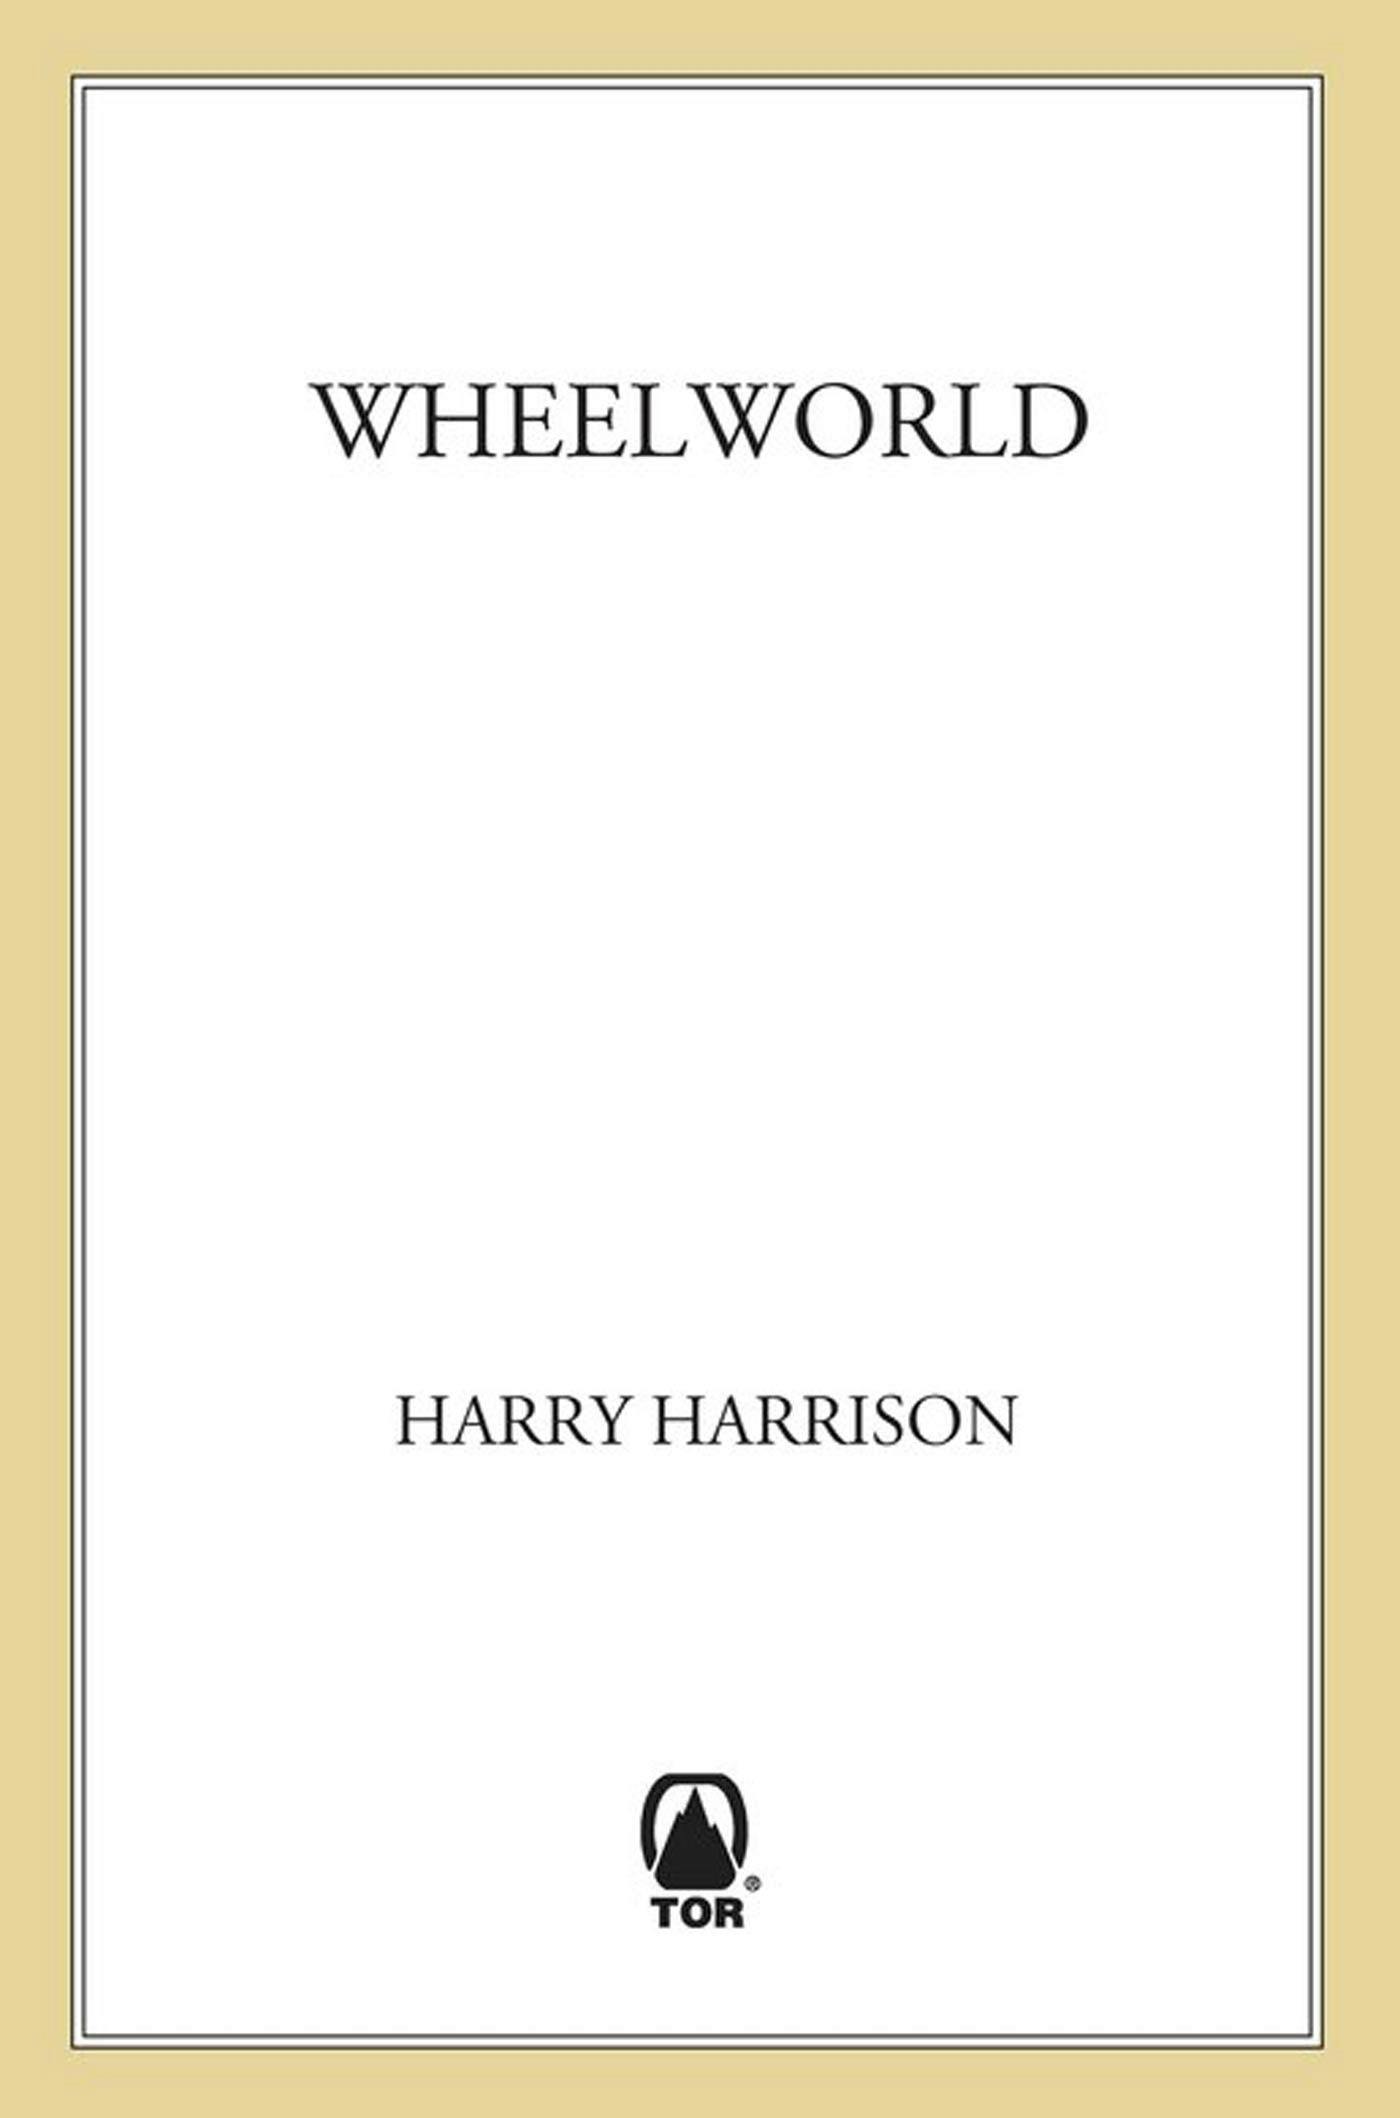 Cover for the book titled as: Wheelworld